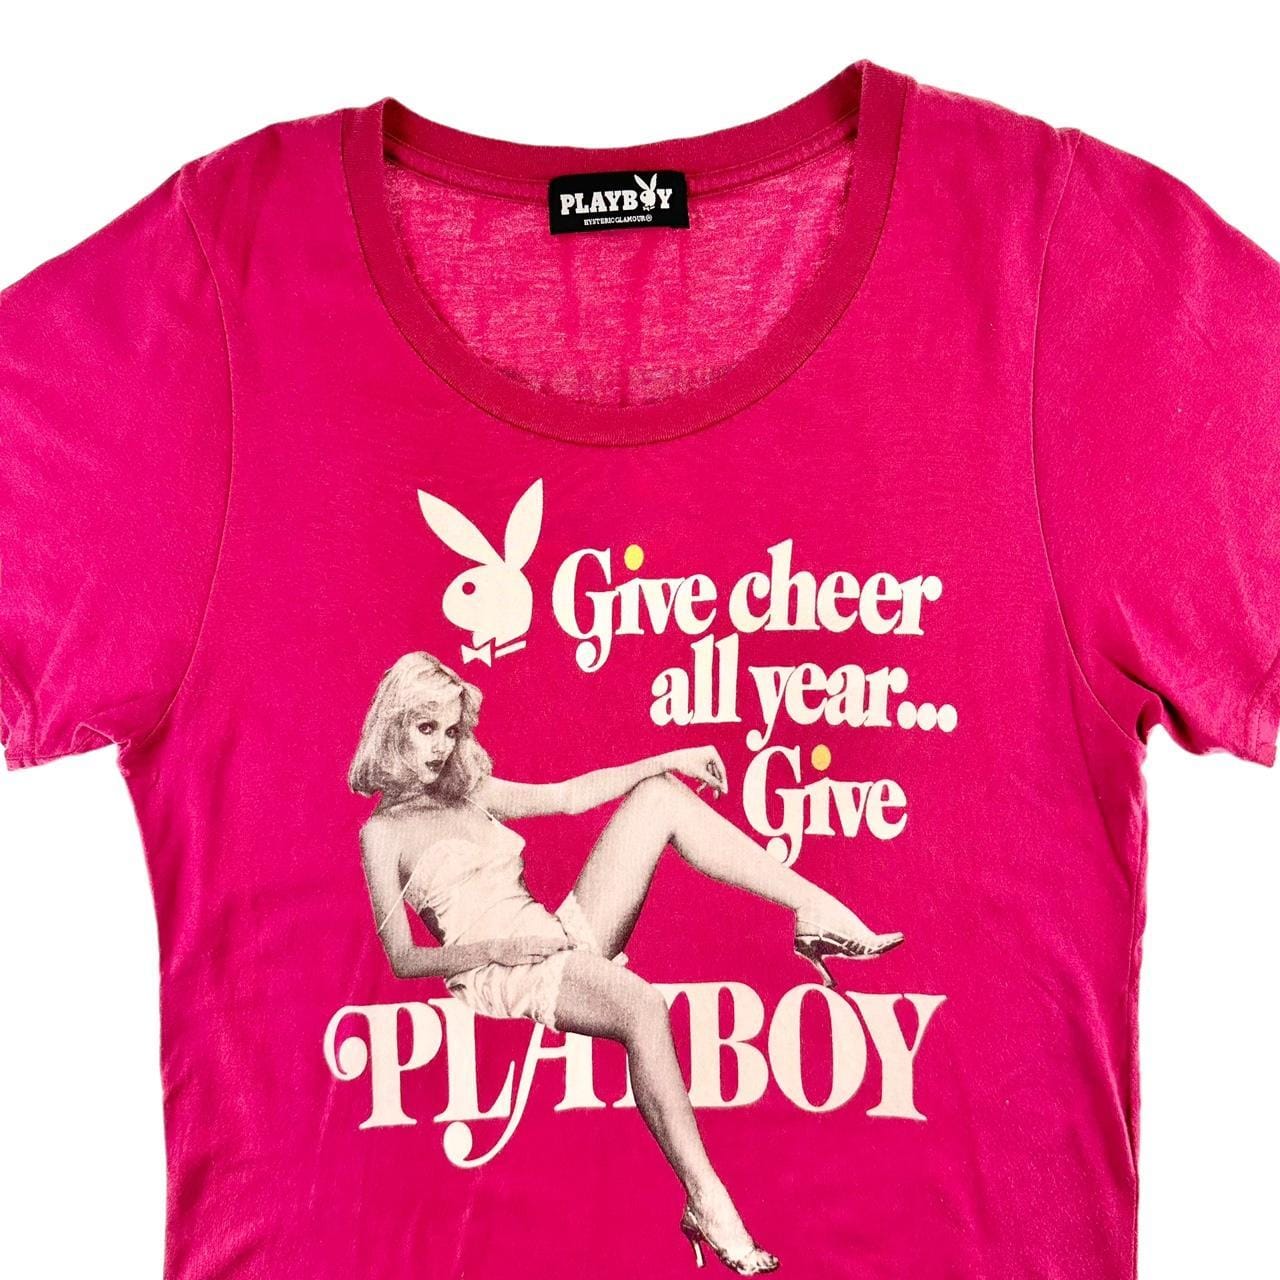 Hysteric Glamour X Playboy long t shirt woman’s size M